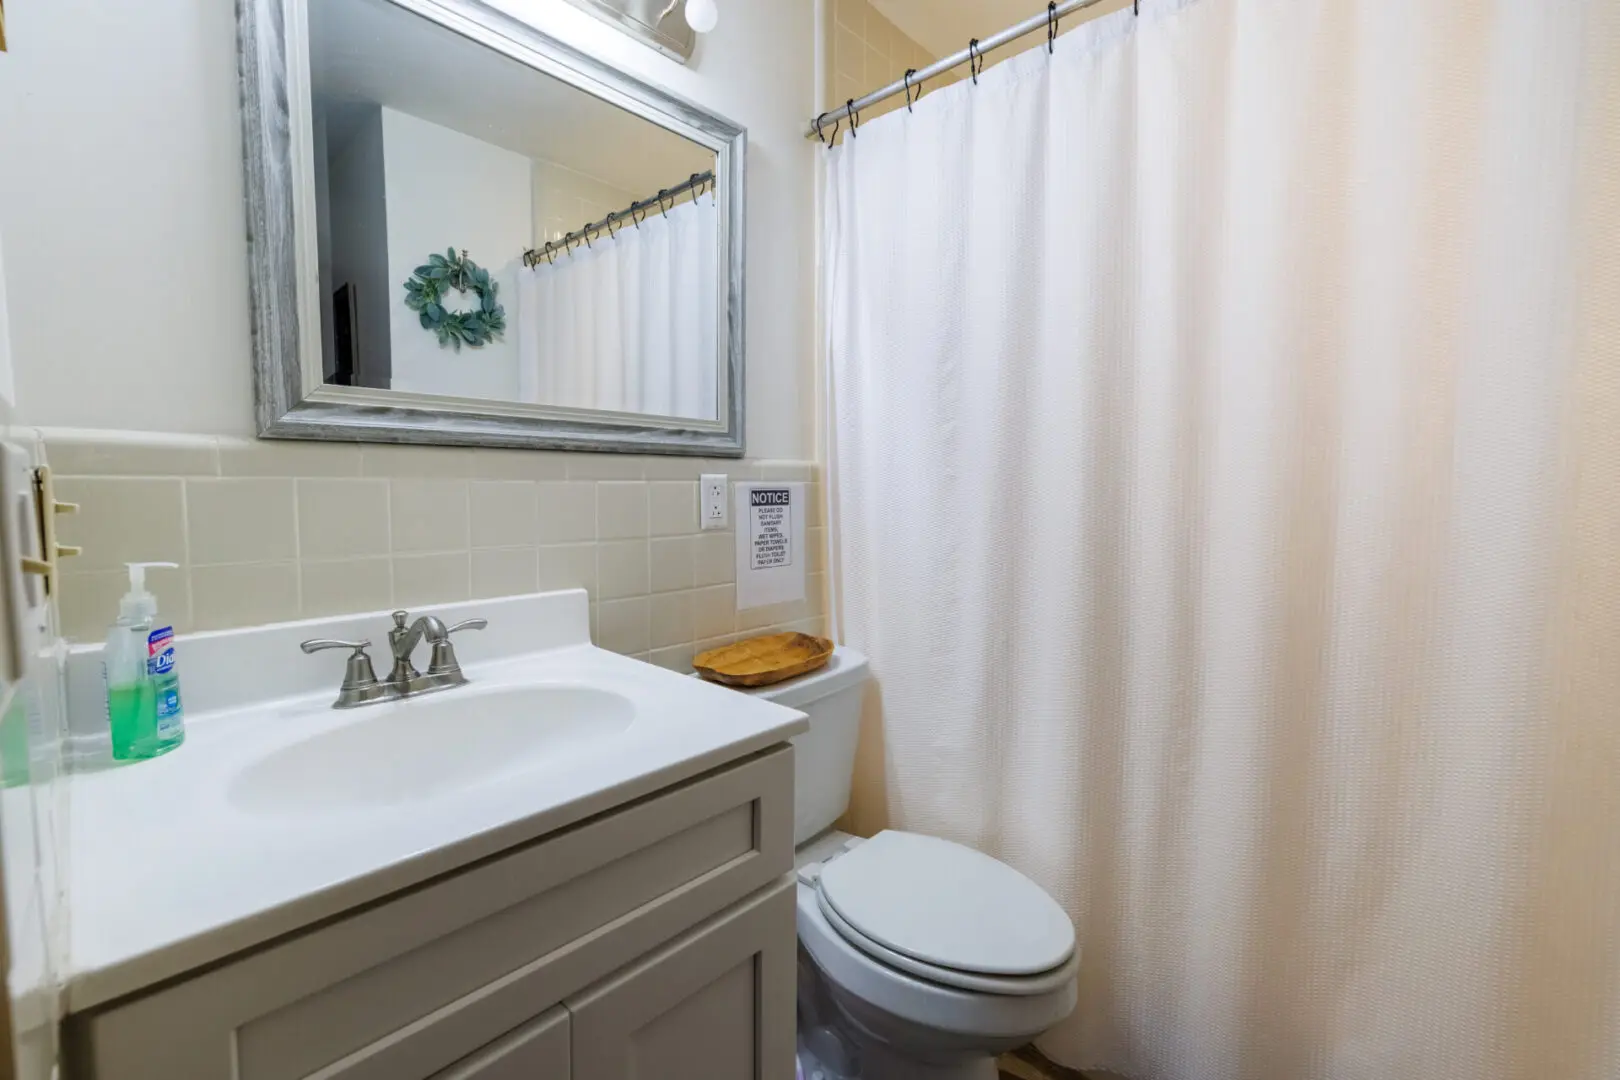 A vacation bathroom with a toilet, sink, and shower curtain.